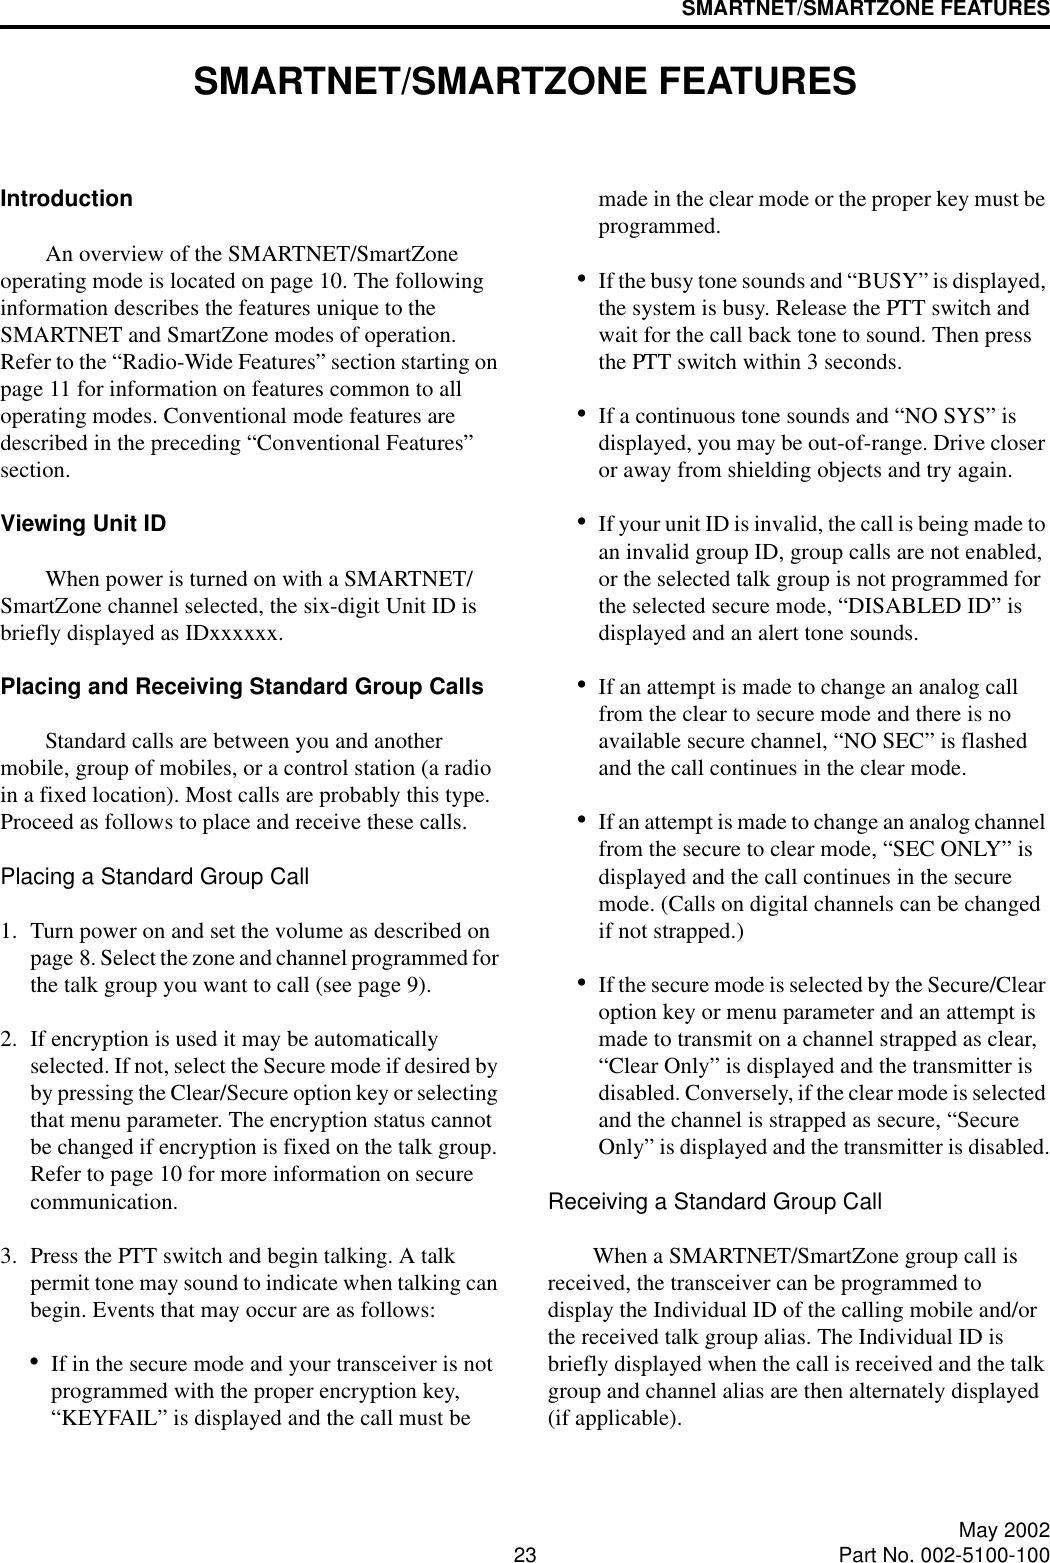 23 May 2002Part No. 002-5100-100SMARTNET/SMARTZONE FEATURESSMARTNET/SMARTZONE FEATURESIntroductionAn overview of the SMARTNET/SmartZone operating mode is located on page 10. The following information describes the features unique to the SMARTNET and SmartZone modes of operation. Refer to the “Radio-Wide Features” section starting on page 11 for information on features common to all operating modes. Conventional mode features are described in the preceding “Conventional Features” section.Viewing Unit IDWhen power is turned on with a SMARTNET/SmartZone channel selected, the six-digit Unit ID is briefly displayed as IDxxxxxx. Placing and Receiving Standard Group CallsStandard calls are between you and another mobile, group of mobiles, or a control station (a radio in a fixed location). Most calls are probably this type. Proceed as follows to place and receive these calls. Placing a Standard Group Call1. Turn power on and set the volume as described on page 8. Select the zone and channel programmed for the talk group you want to call (see page 9). 2. If encryption is used it may be automatically selected. If not, select the Secure mode if desired by by pressing the Clear/Secure option key or selecting that menu parameter. The encryption status cannot be changed if encryption is fixed on the talk group. Refer to page 10 for more information on secure communication.3. Press the PTT switch and begin talking. A talk permit tone may sound to indicate when talking can begin. Events that may occur are as follows:•If in the secure mode and your transceiver is not programmed with the proper encryption key, “KEYFAIL” is displayed and the call must be made in the clear mode or the proper key must be programmed.•If the busy tone sounds and “BUSY” is displayed, the system is busy. Release the PTT switch and wait for the call back tone to sound. Then press the PTT switch within 3 seconds.•If a continuous tone sounds and “NO SYS” is displayed, you may be out-of-range. Drive closer or away from shielding objects and try again.•If your unit ID is invalid, the call is being made to an invalid group ID, group calls are not enabled, or the selected talk group is not programmed for the selected secure mode, “DISABLED ID” is displayed and an alert tone sounds.•If an attempt is made to change an analog call from the clear to secure mode and there is no available secure channel, “NO SEC” is flashed and the call continues in the clear mode.•If an attempt is made to change an analog channel from the secure to clear mode, “SEC ONLY” is displayed and the call continues in the secure mode. (Calls on digital channels can be changed if not strapped.)•If the secure mode is selected by the Secure/Clear option key or menu parameter and an attempt is made to transmit on a channel strapped as clear, “Clear Only” is displayed and the transmitter is disabled. Conversely, if the clear mode is selected and the channel is strapped as secure, “Secure Only” is displayed and the transmitter is disabled.Receiving a Standard Group CallWhen a SMARTNET/SmartZone group call is received, the transceiver can be programmed to display the Individual ID of the calling mobile and/or the received talk group alias. The Individual ID is briefly displayed when the call is received and the talk group and channel alias are then alternately displayed (if applicable).